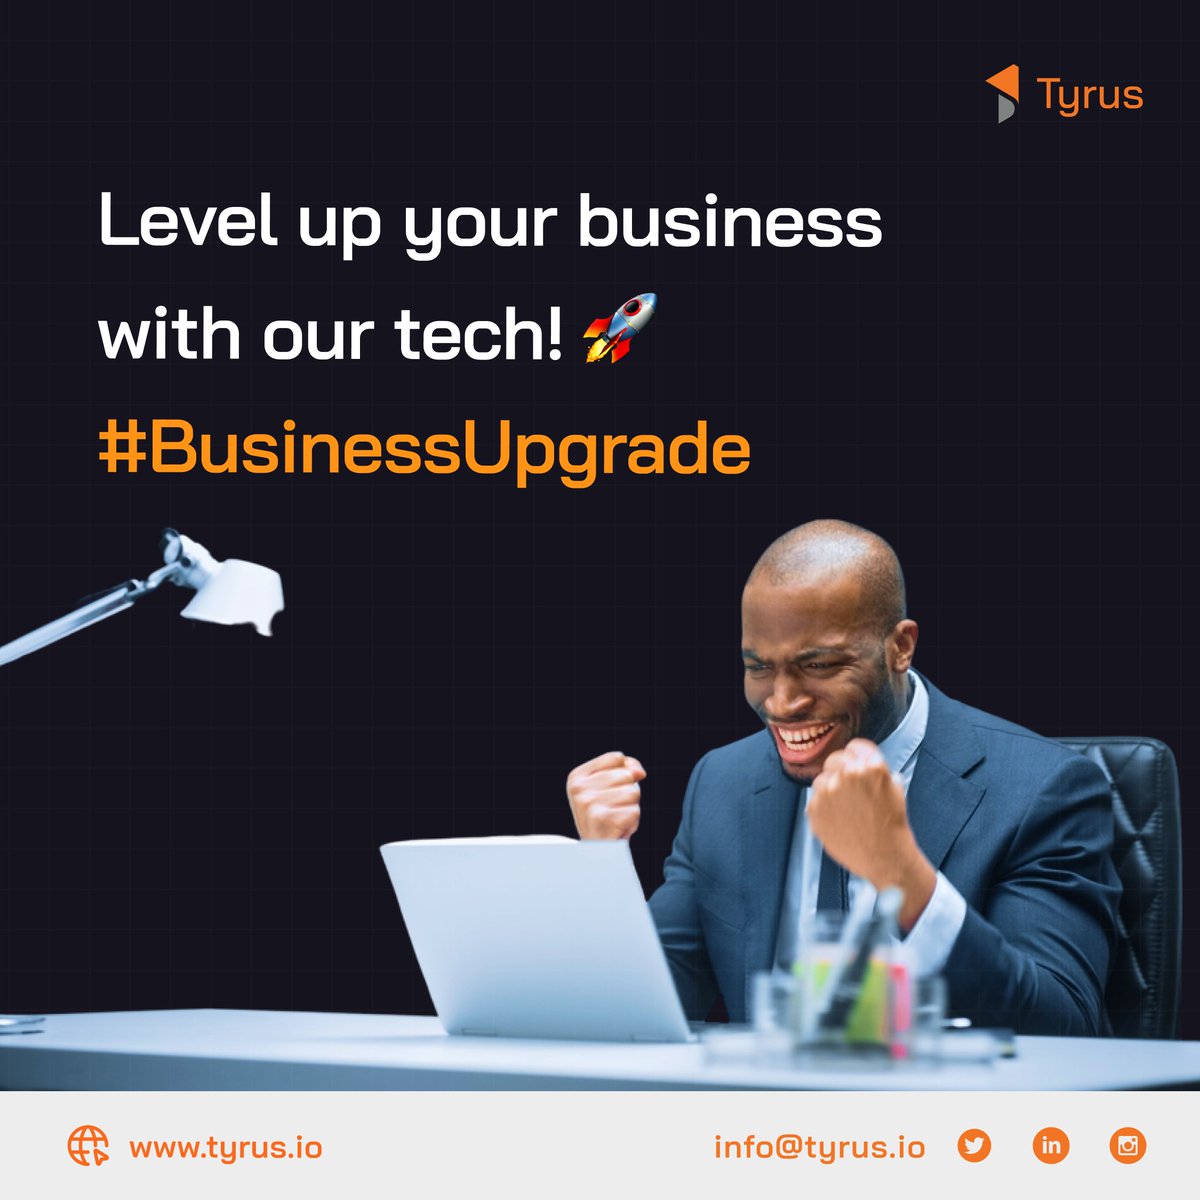 Stay ahead of the competition and level your business with our comprehensive tech solutions to enhance productivity, and drive profitability. 
.
.
#tyrustechnologies #levelyourbusiness #businessupdate #stayahead #techsolutions #enhanceproductivity #driveprofitability